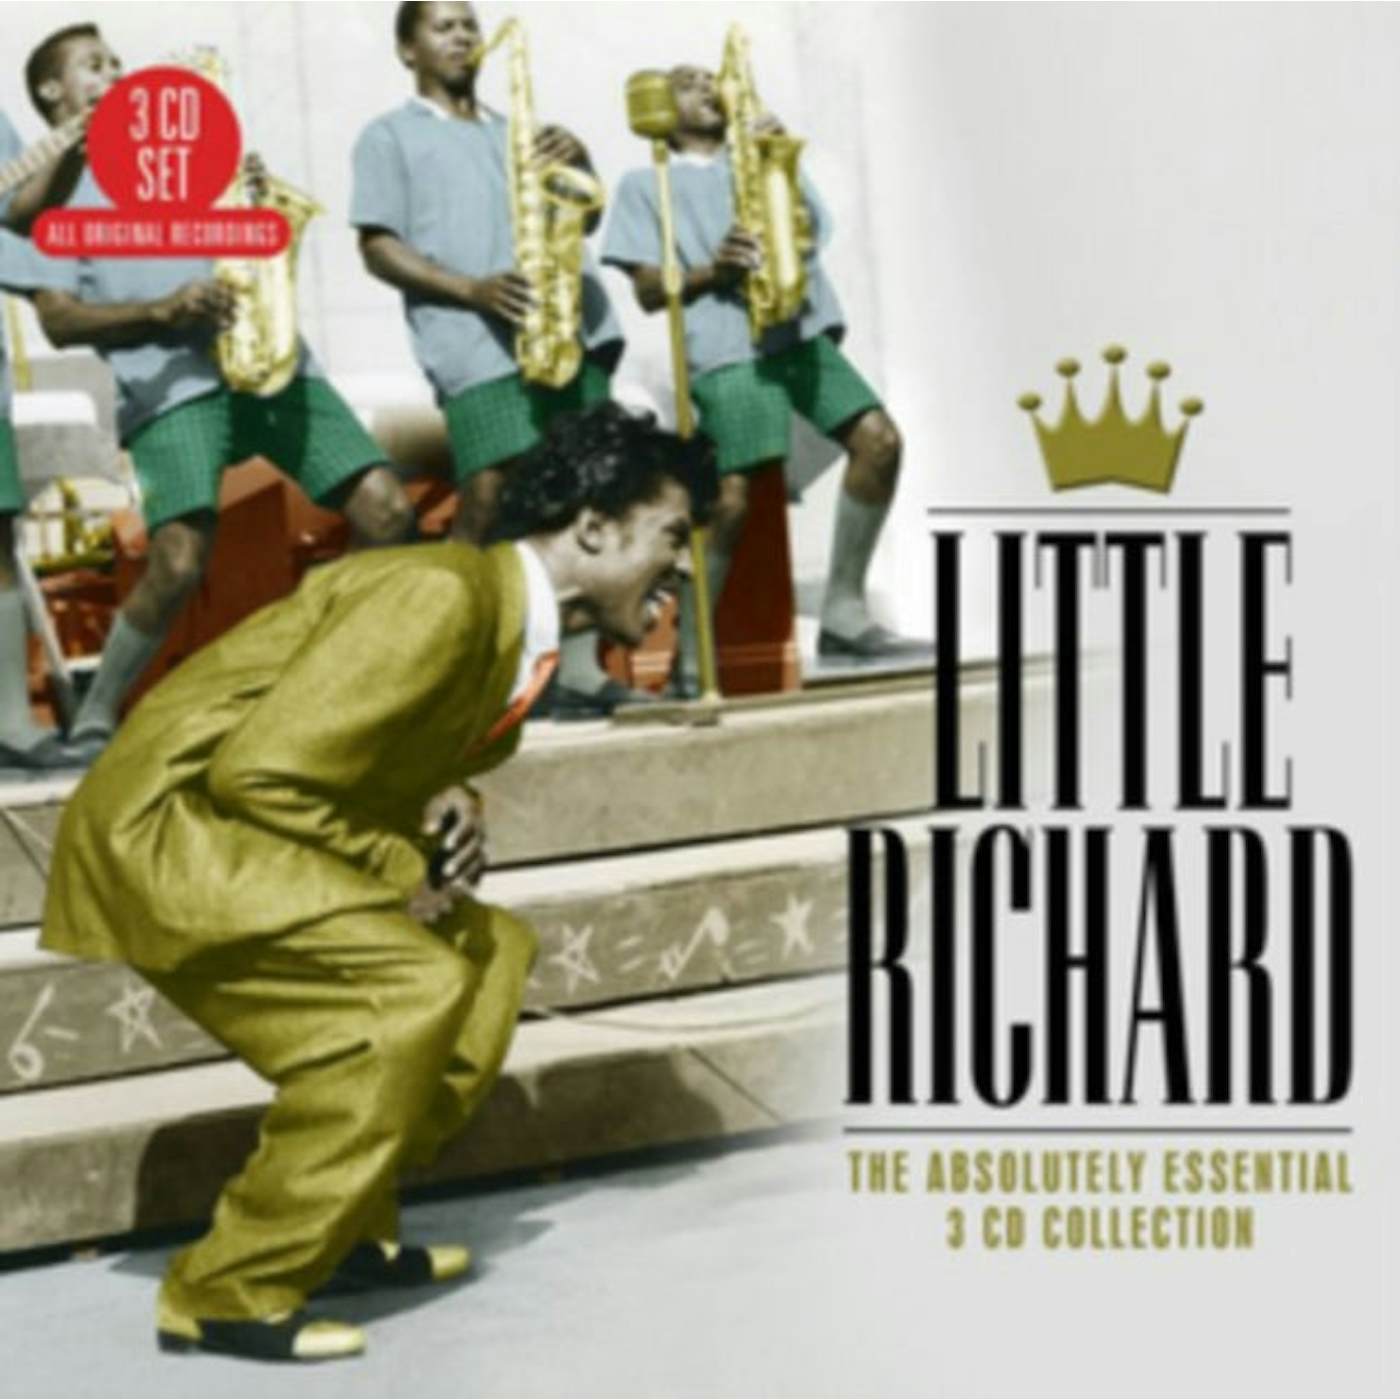 Little Richard CD - The Absolutely Essential